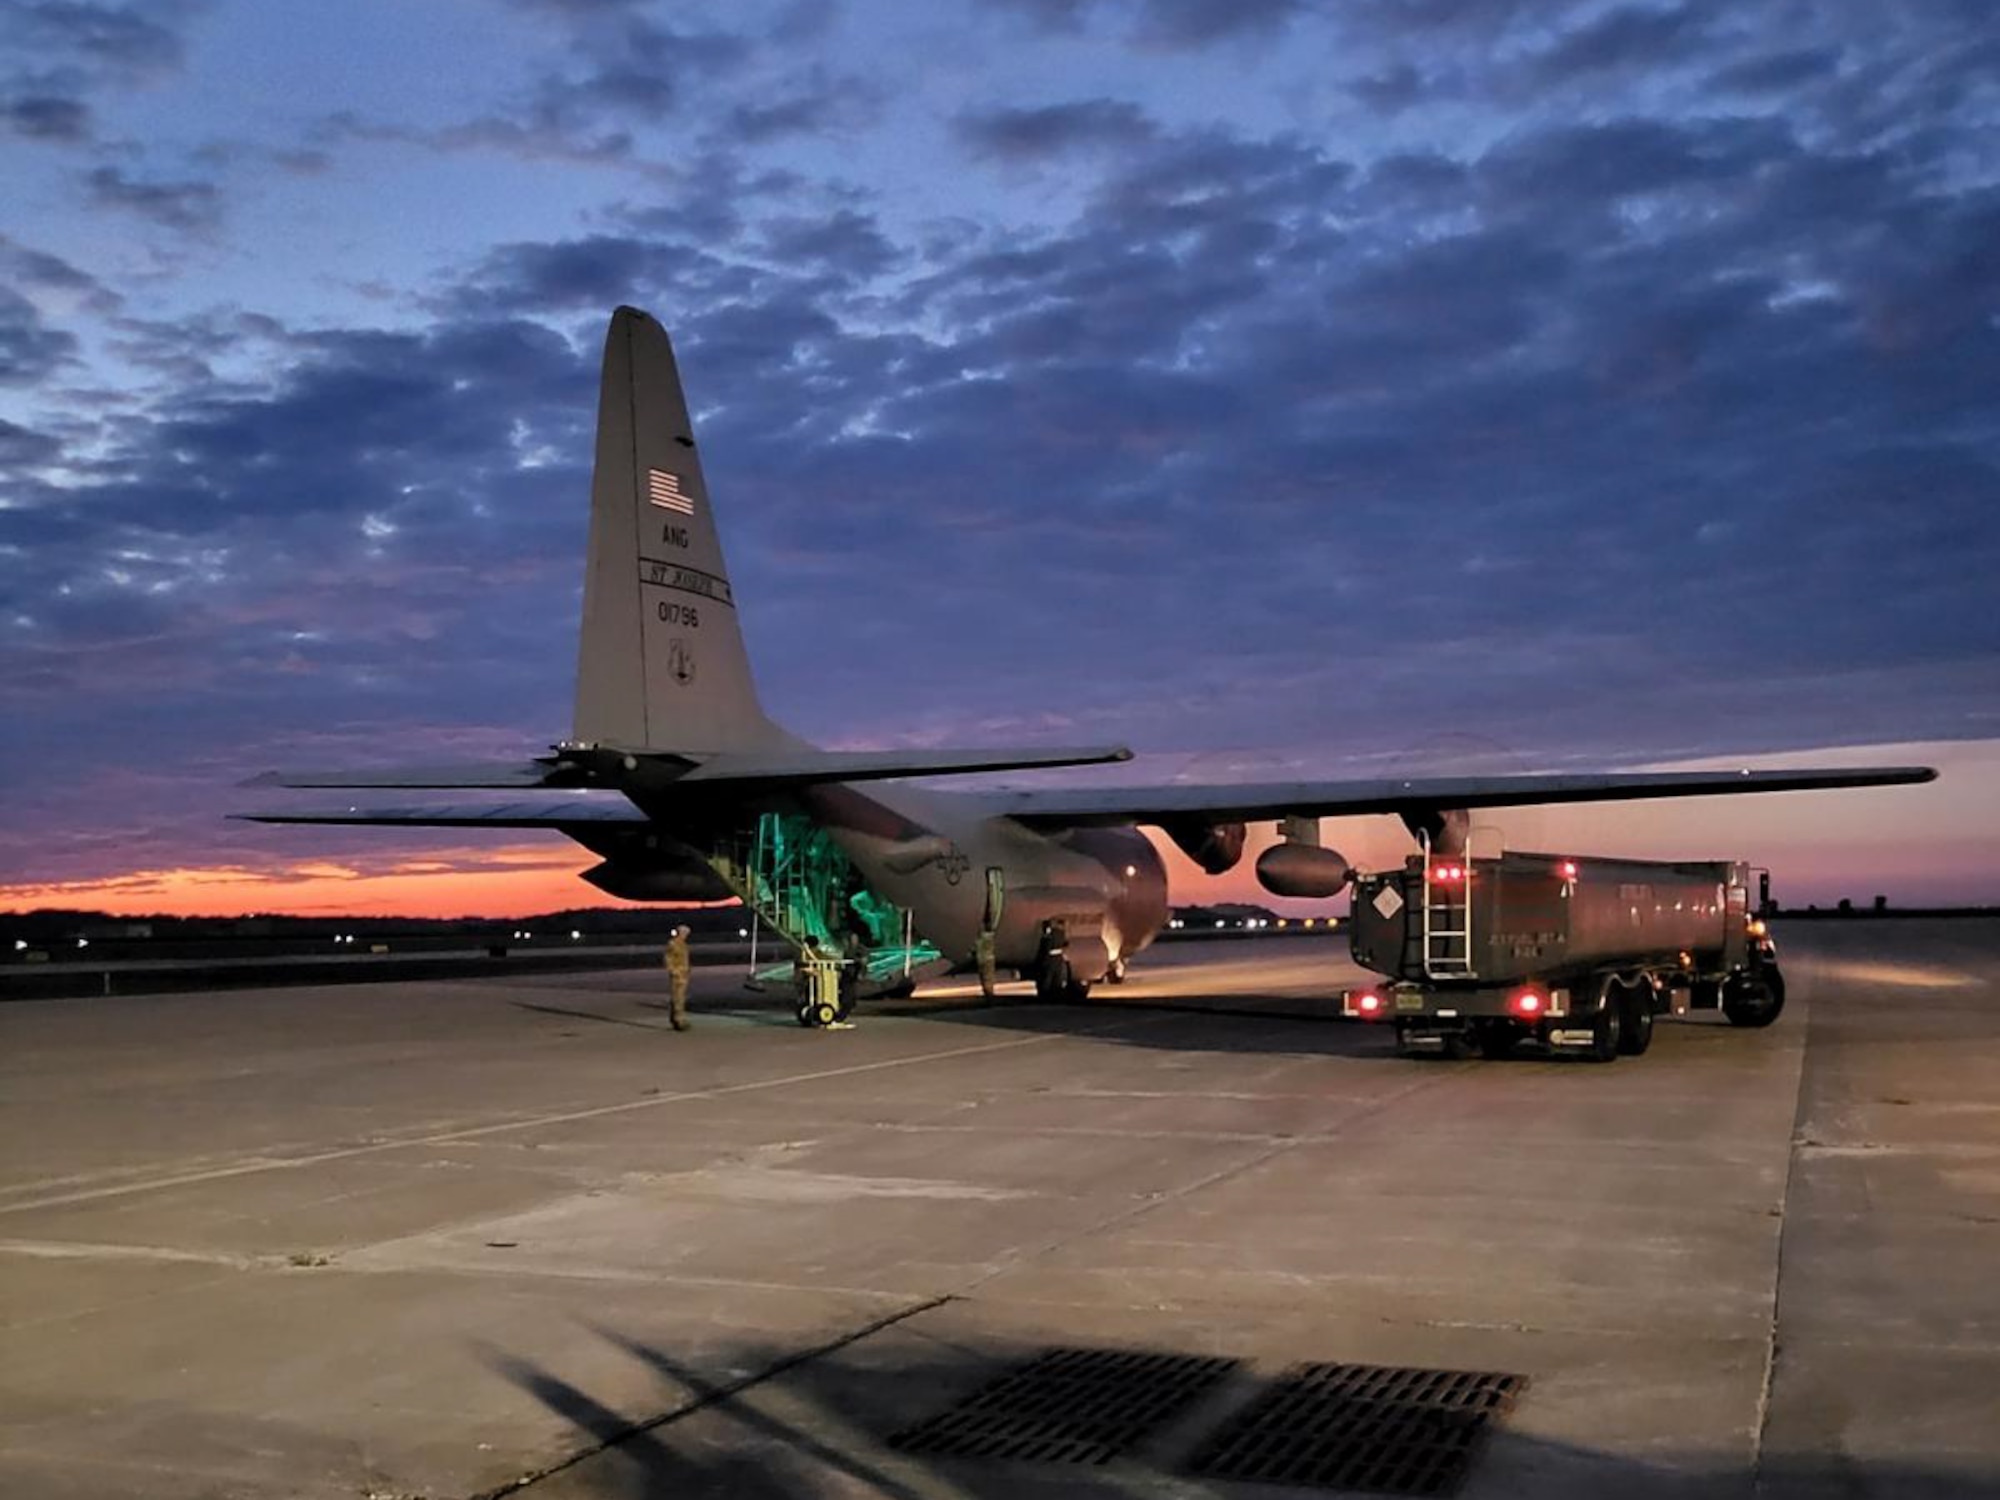 Airmen assigned to the 139th Logistics Readiness Squadron’s petroleum, oils and lubricants office, Missouri Air National Guard, perform a ‘wet-wing’ defuel of a C-130 Hercules aircraft at Rosecrans Air National Guard Base, St. Joseph, Missouri, Aug. 16, 2022. This was the first time the 139th POL office conducted a ‘wet-wing’ defuel, which means the aircraft engines were running during the operation.